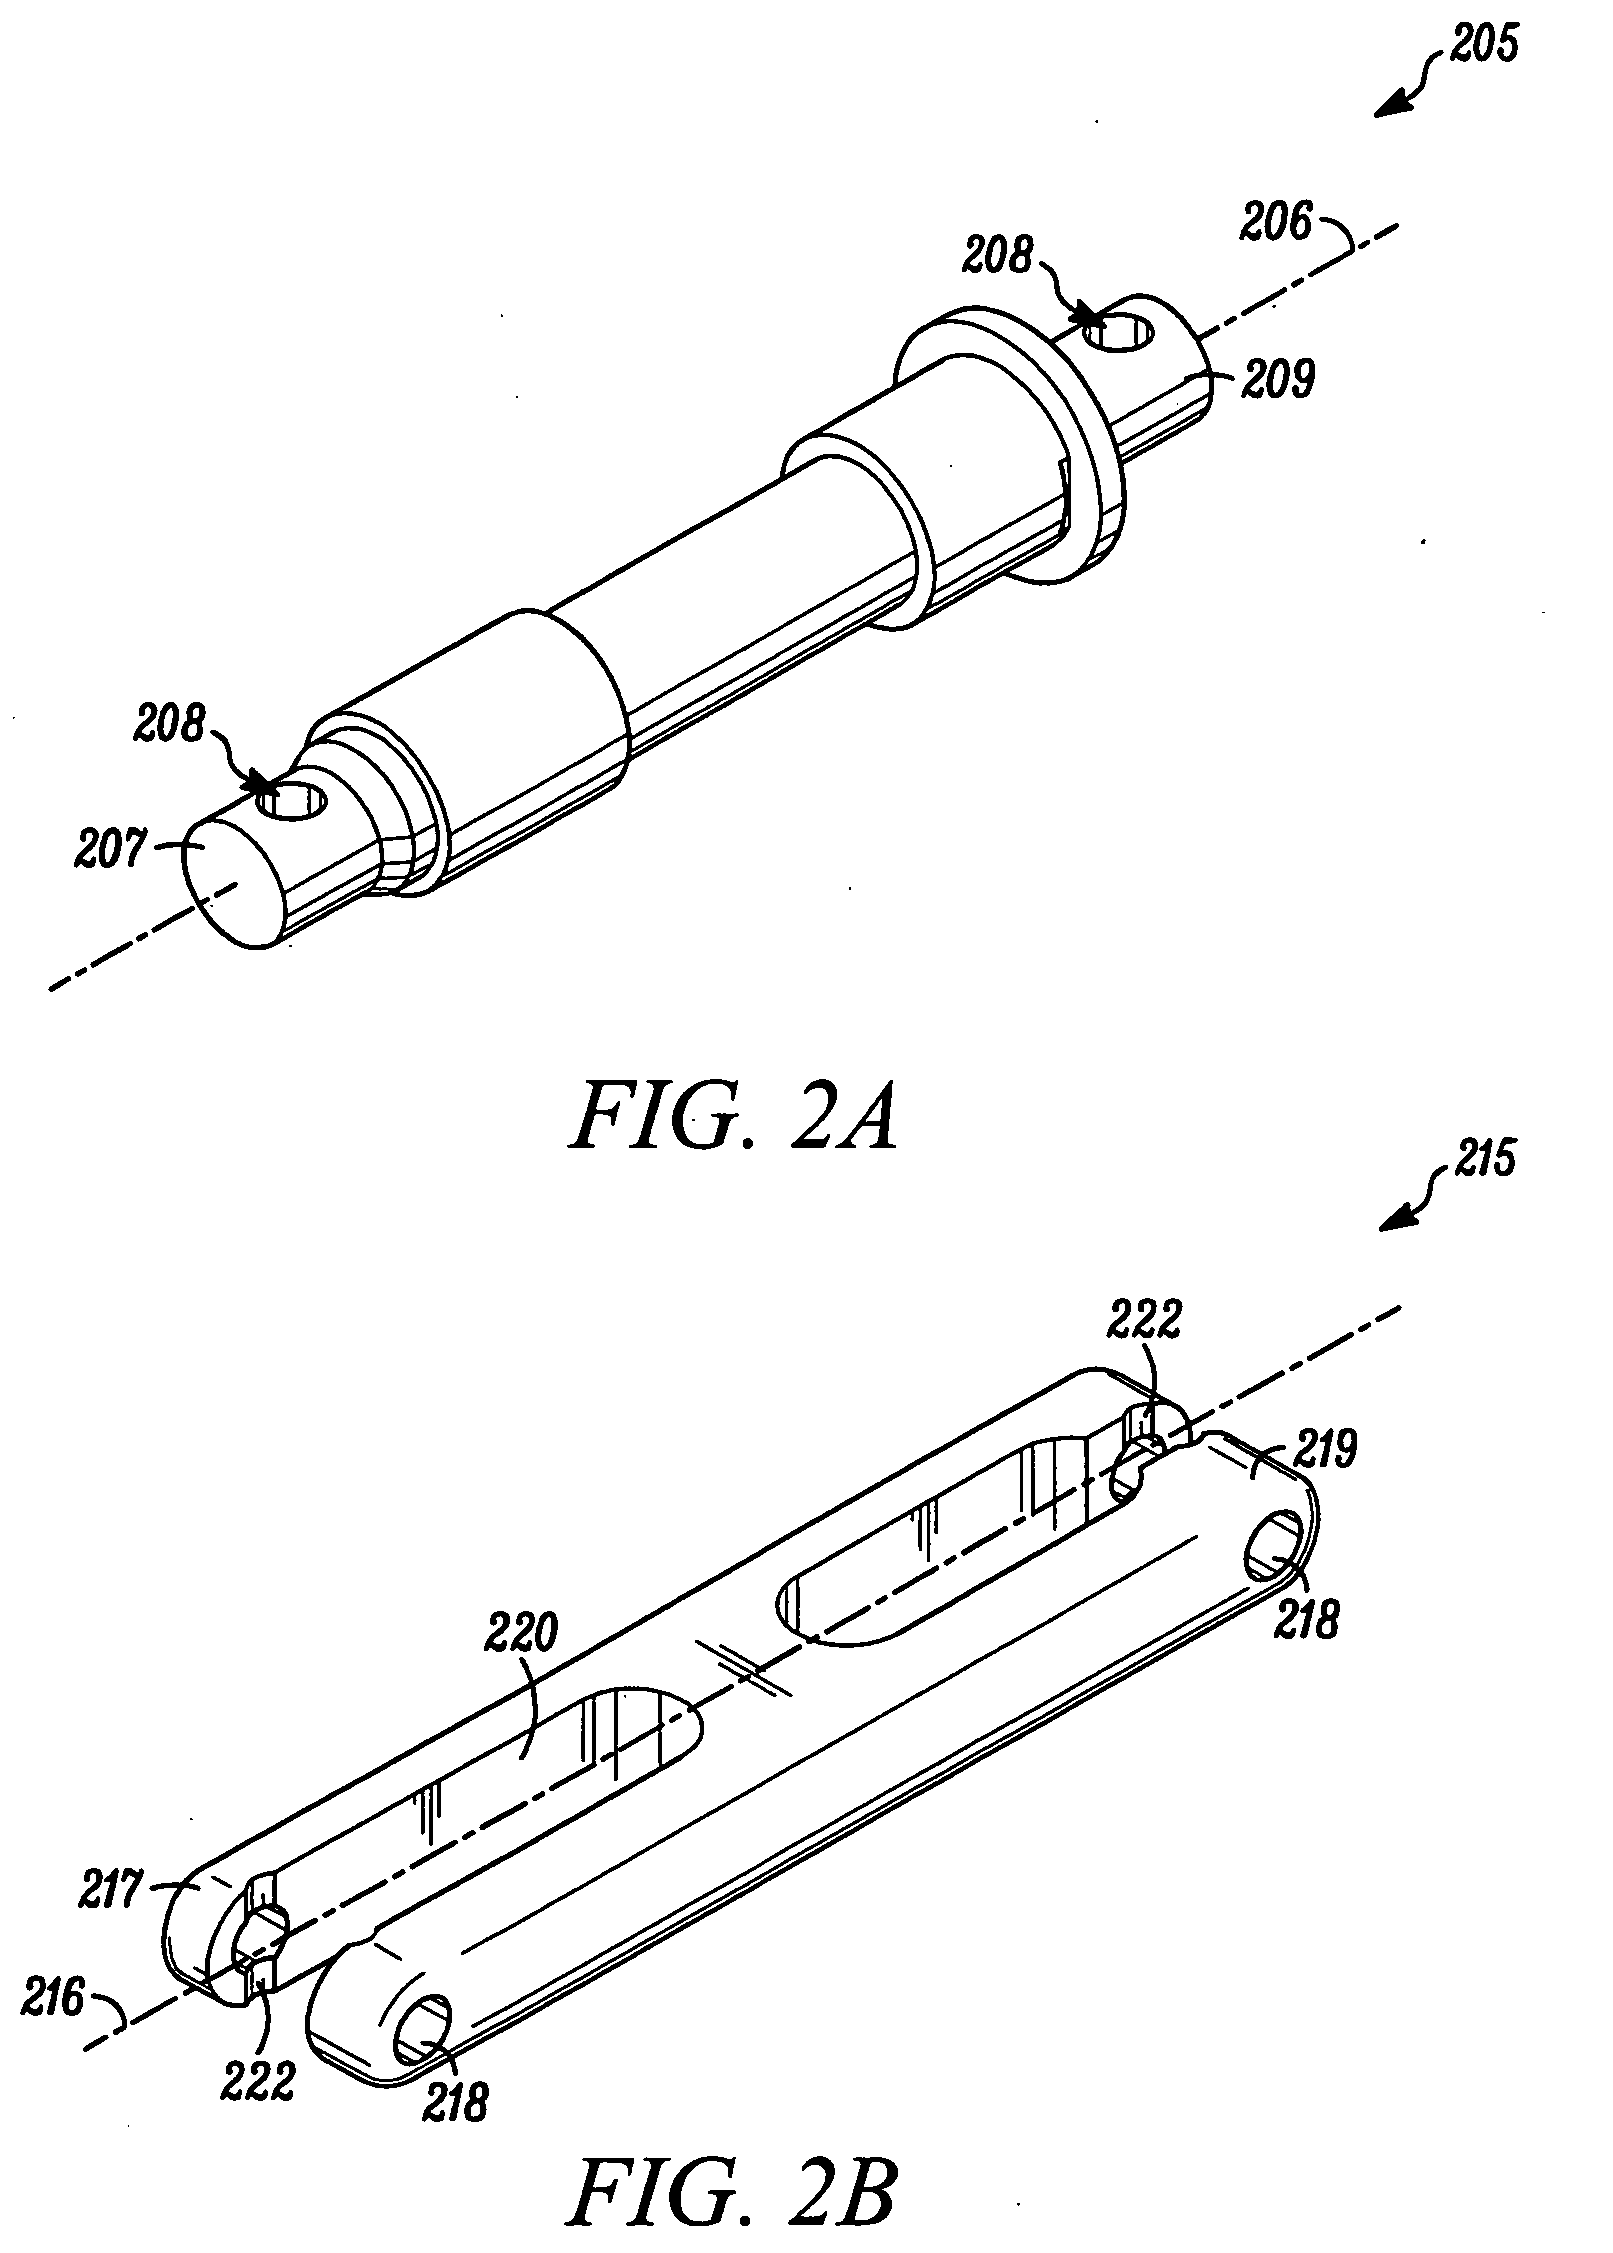 Articulable crankset for converting a pedal-powered vehicle into a push-powered vehicle